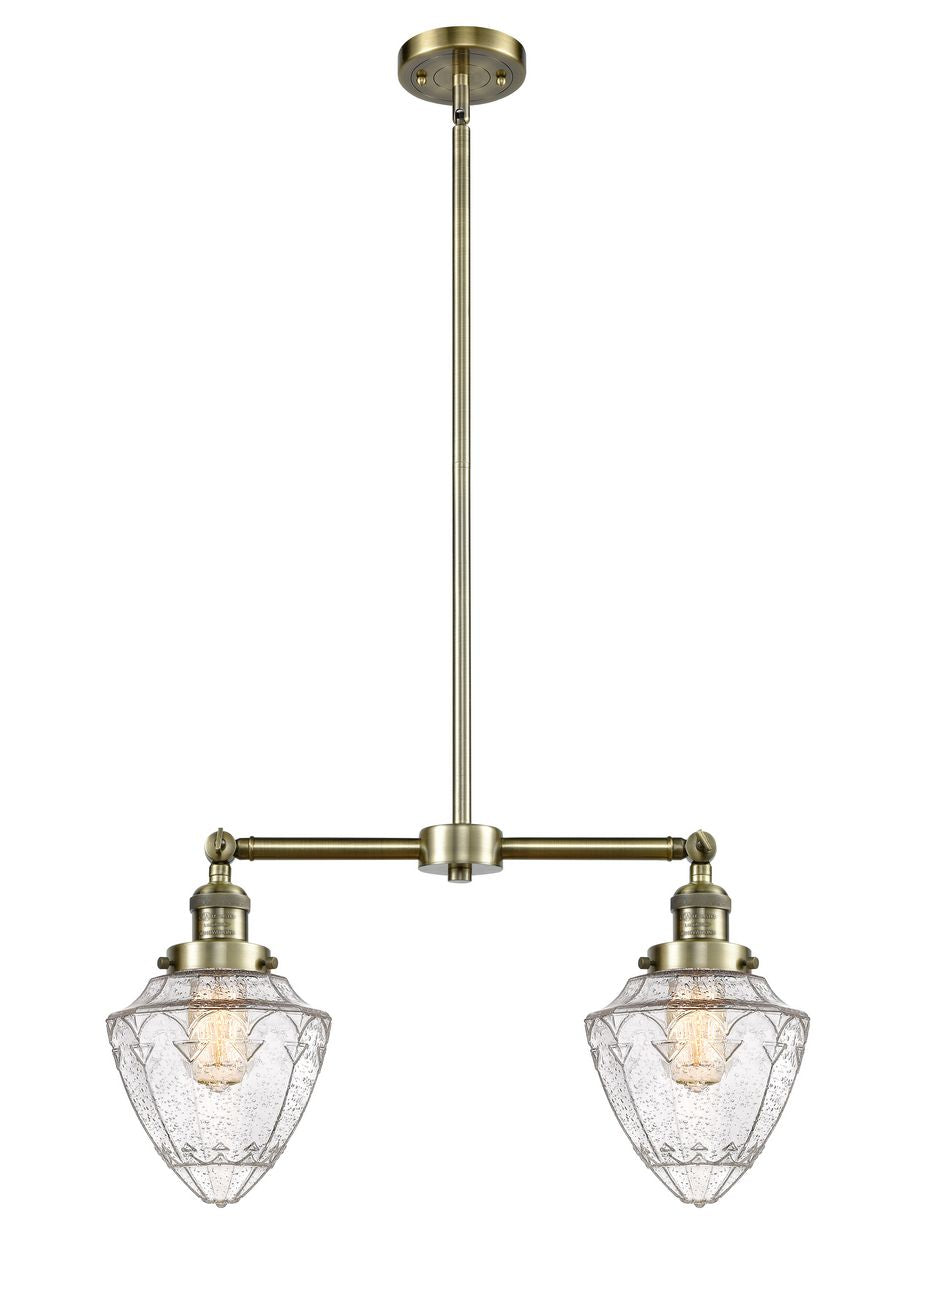 209-AB-G664-7 2-Light 24" Antique Brass Island Light - Seedy Small Bullet Glass - LED Bulb - Dimmensions: 24 x 7 x 15.25<br>Minimum Height : 24.25<br>Maximum Height : 48.25 - Sloped Ceiling Compatible: Yes